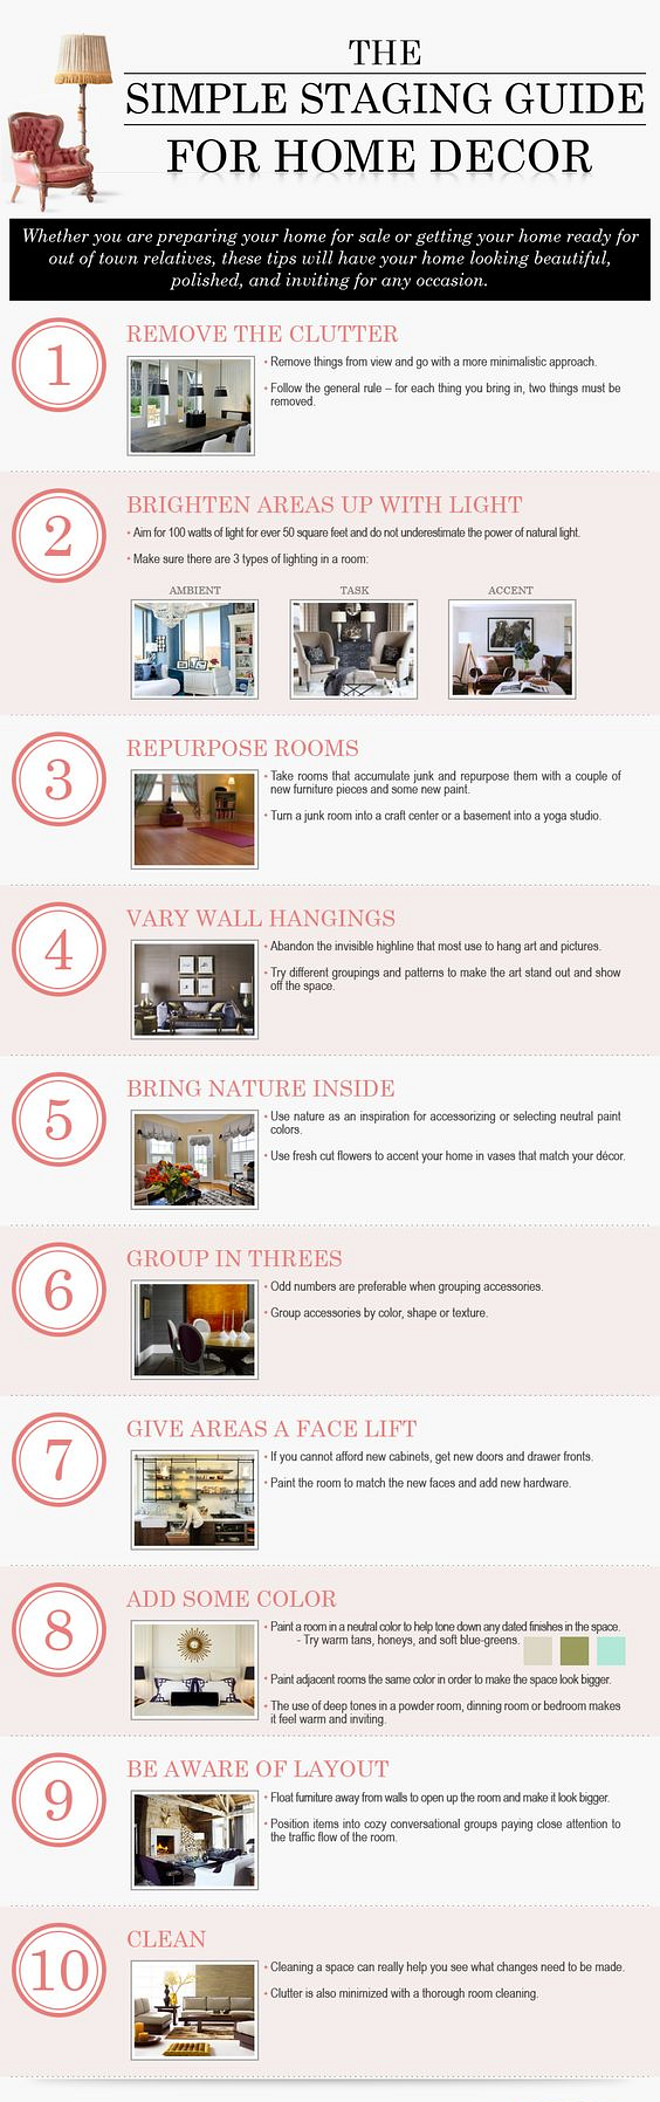 Home staging tips to sell your home faster. #Homestaging